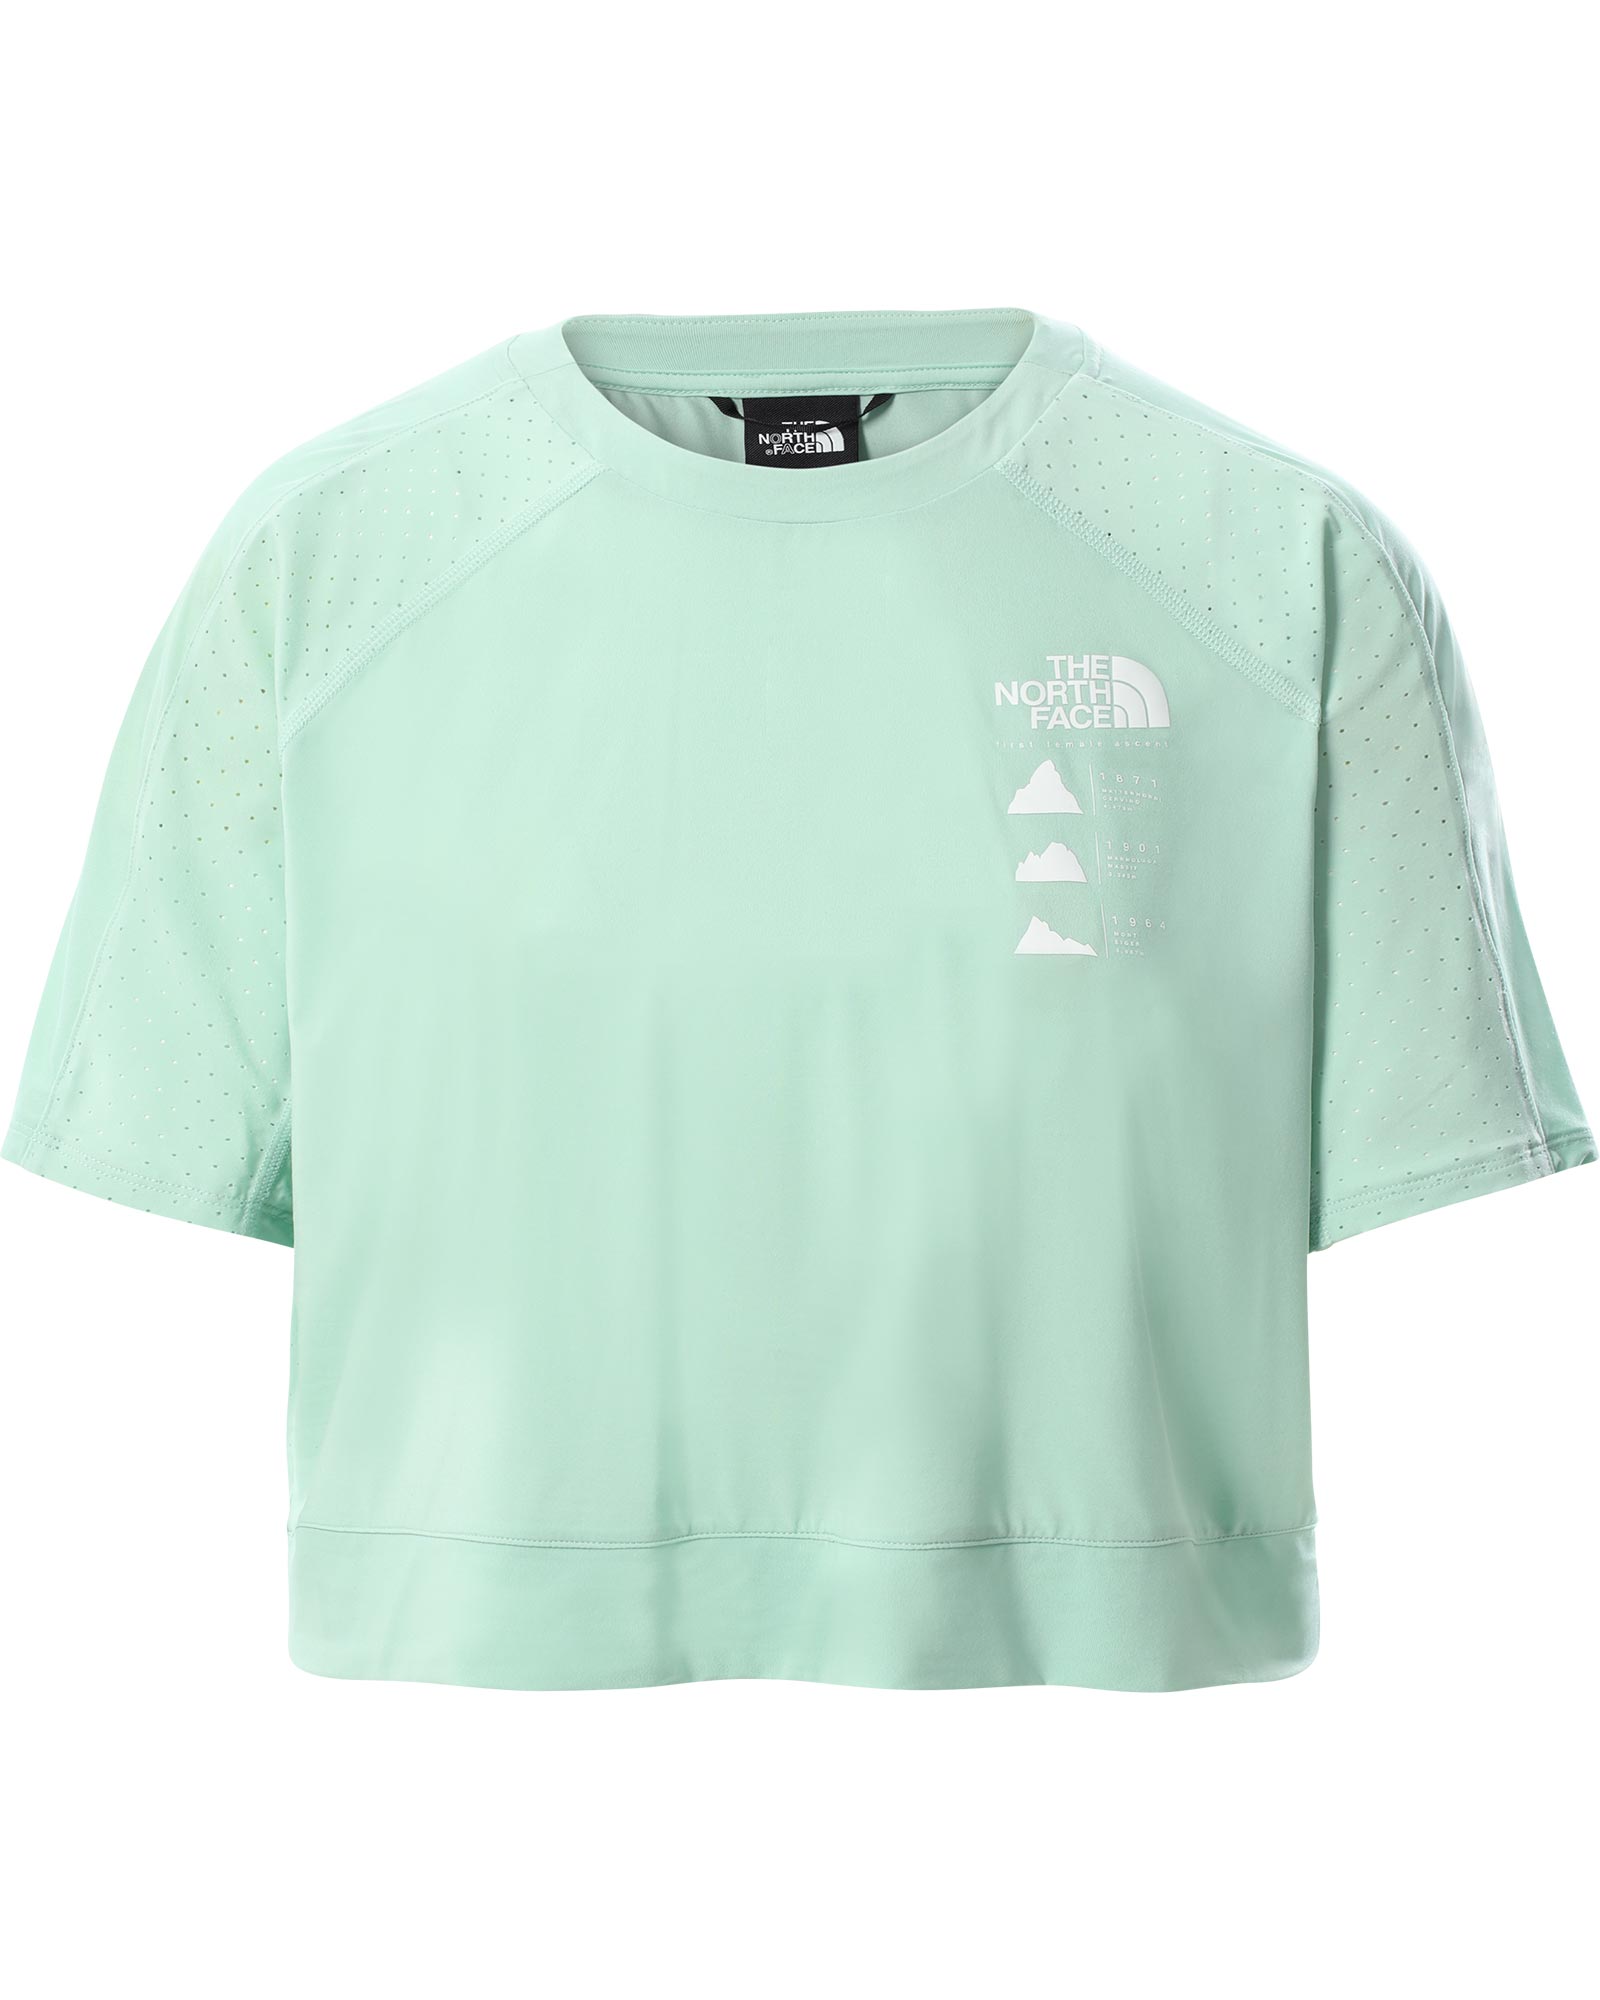 Product image of The North Face Glacier Women's T-Shirt